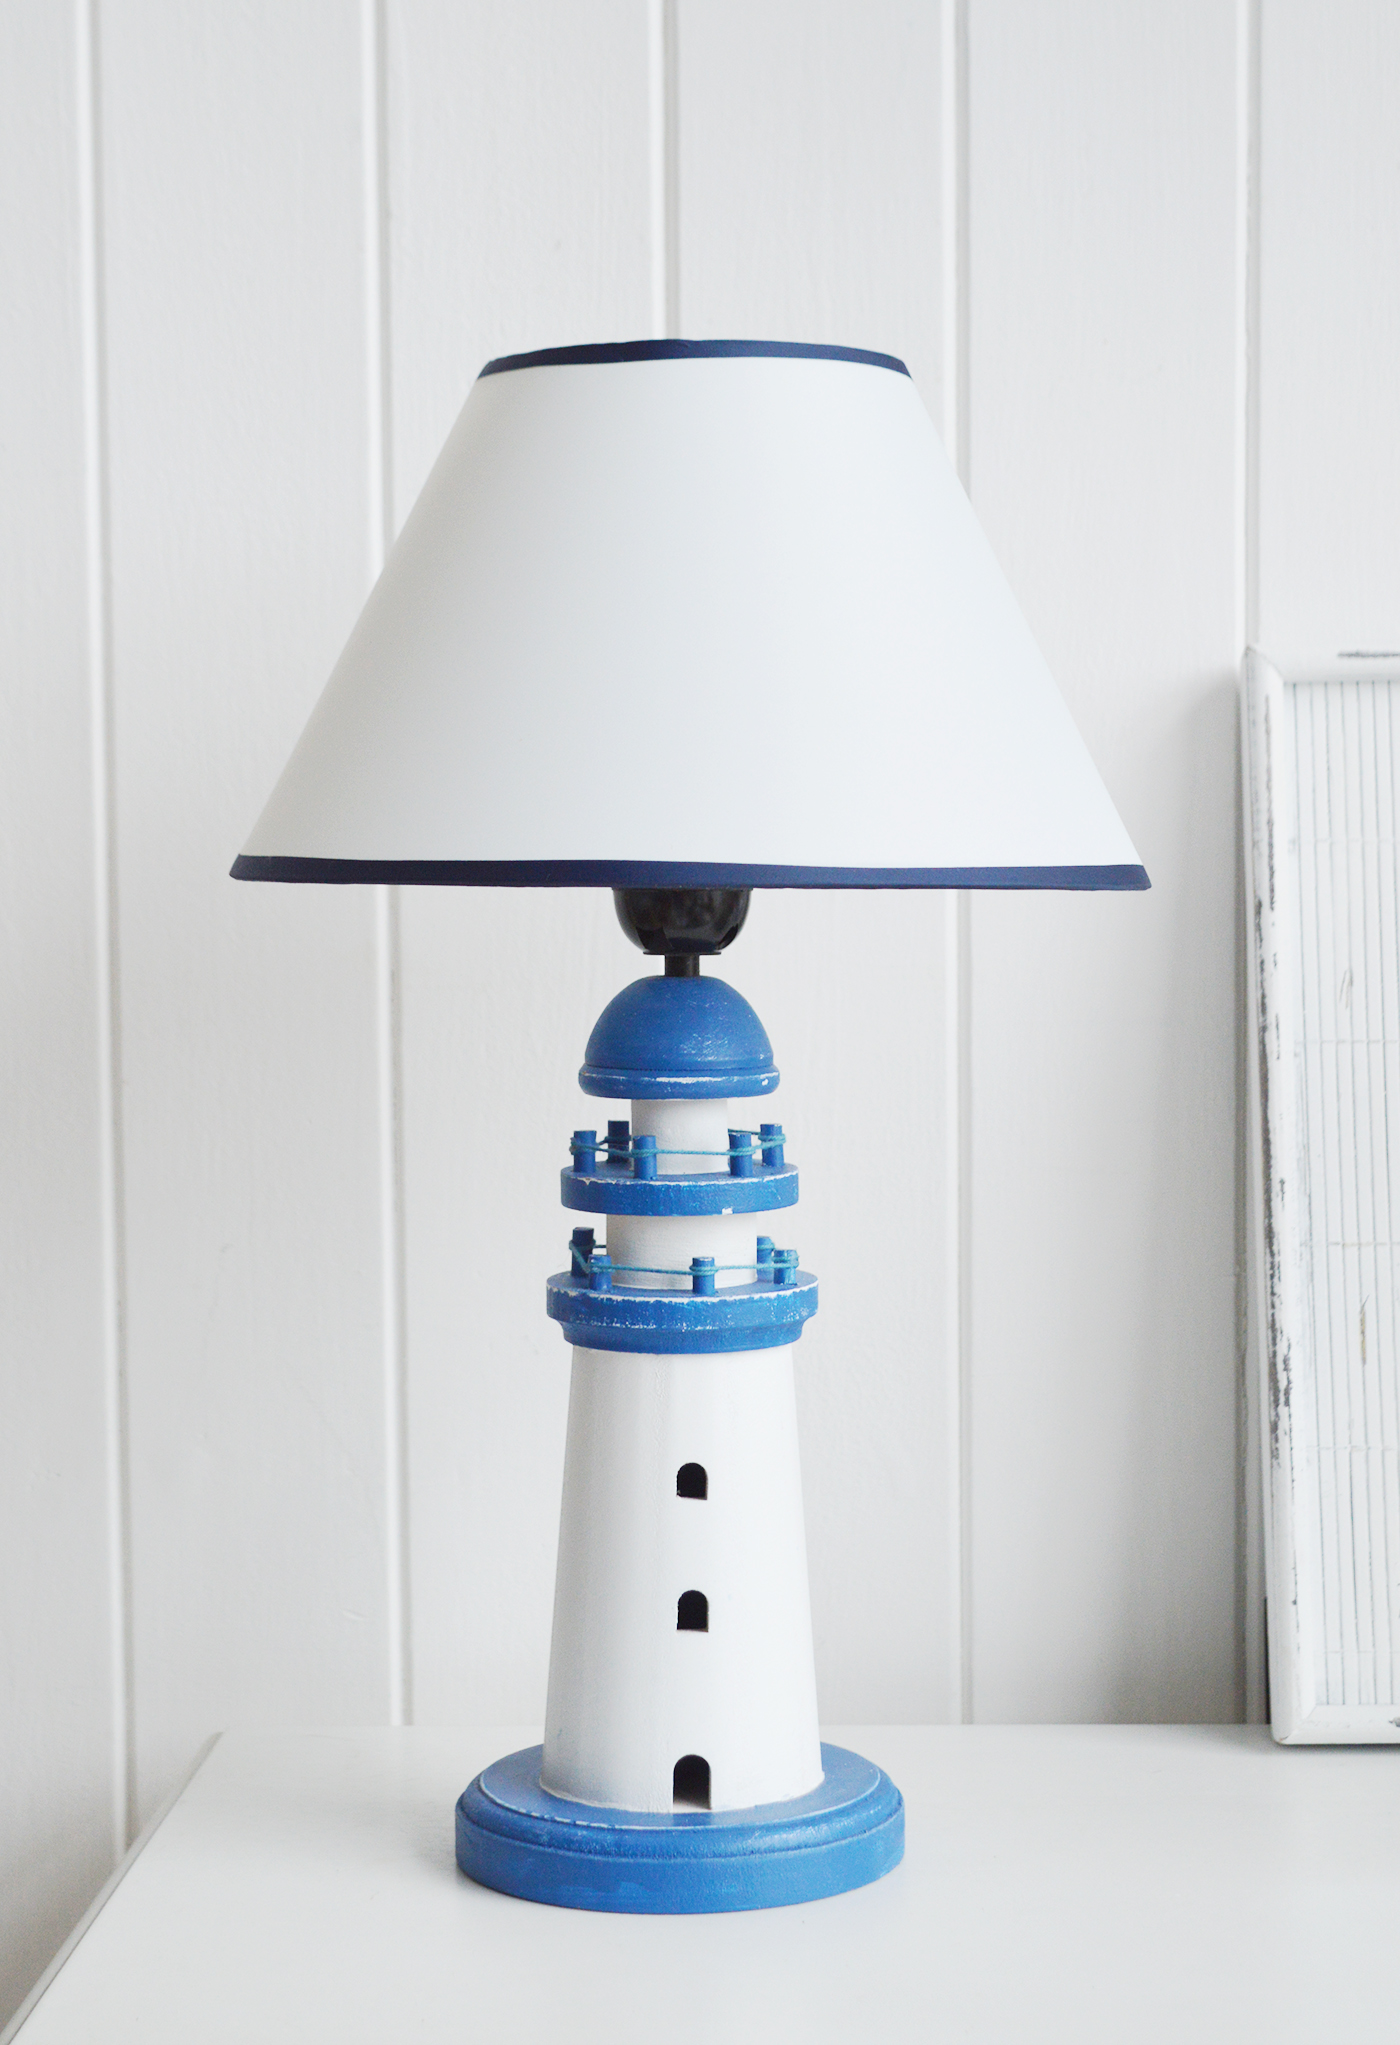 Lighthouse Blue and White table lamp from The White Lighthouse Furniture. A lovely table lamp for bedside table or living room. New England furniture and interiors for coastal, country and city homes. 